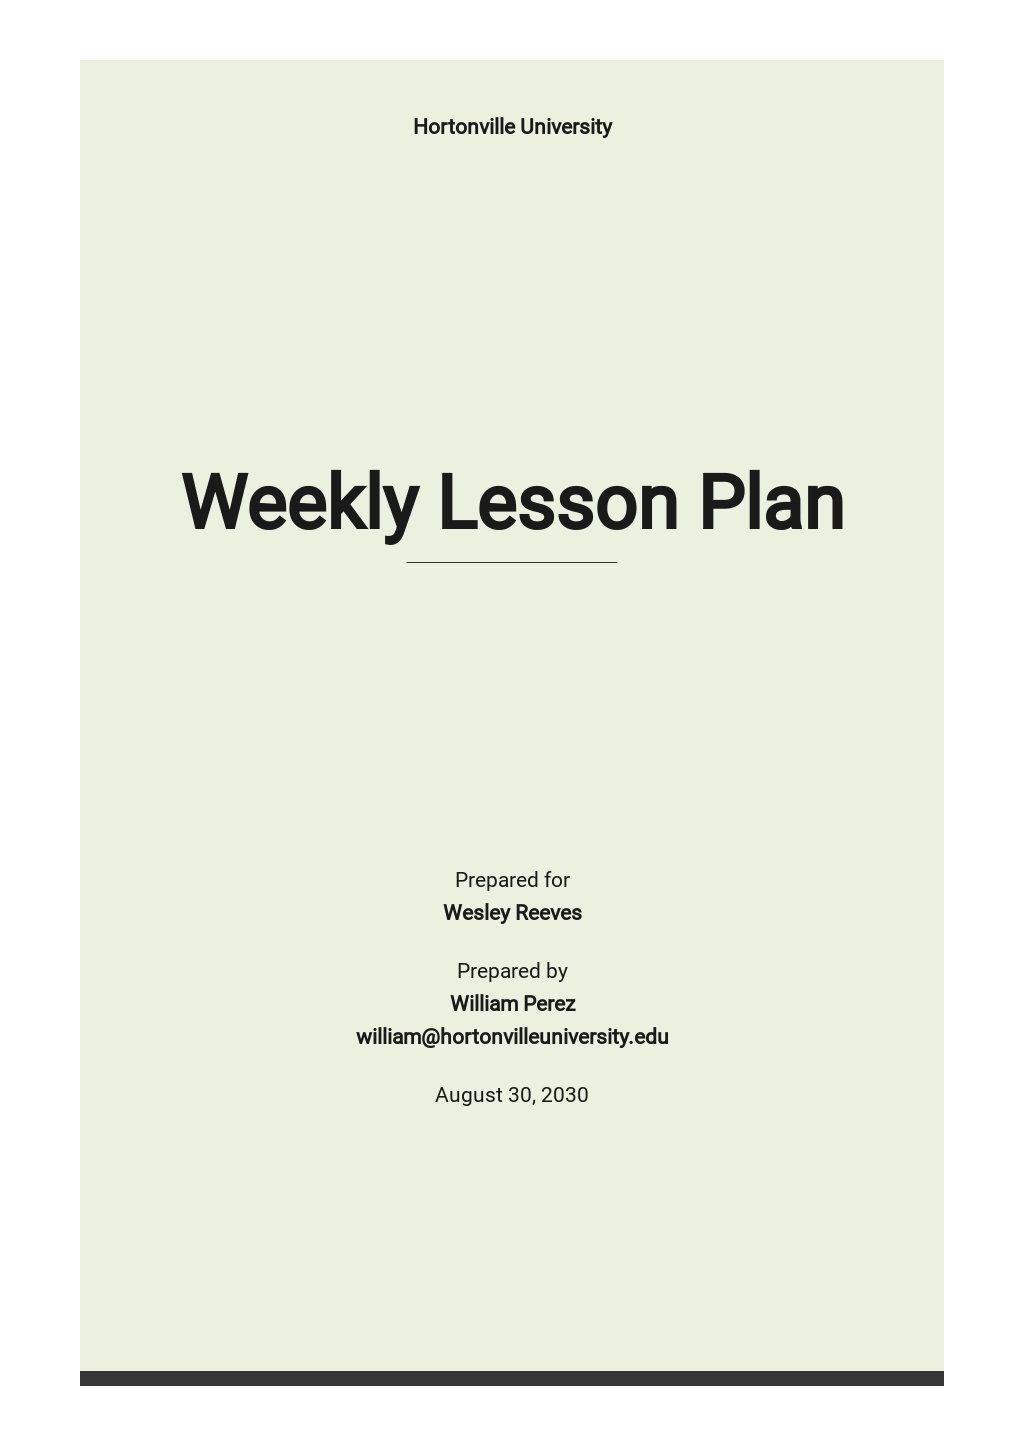 Weekly Lesson Plan Template.jpe